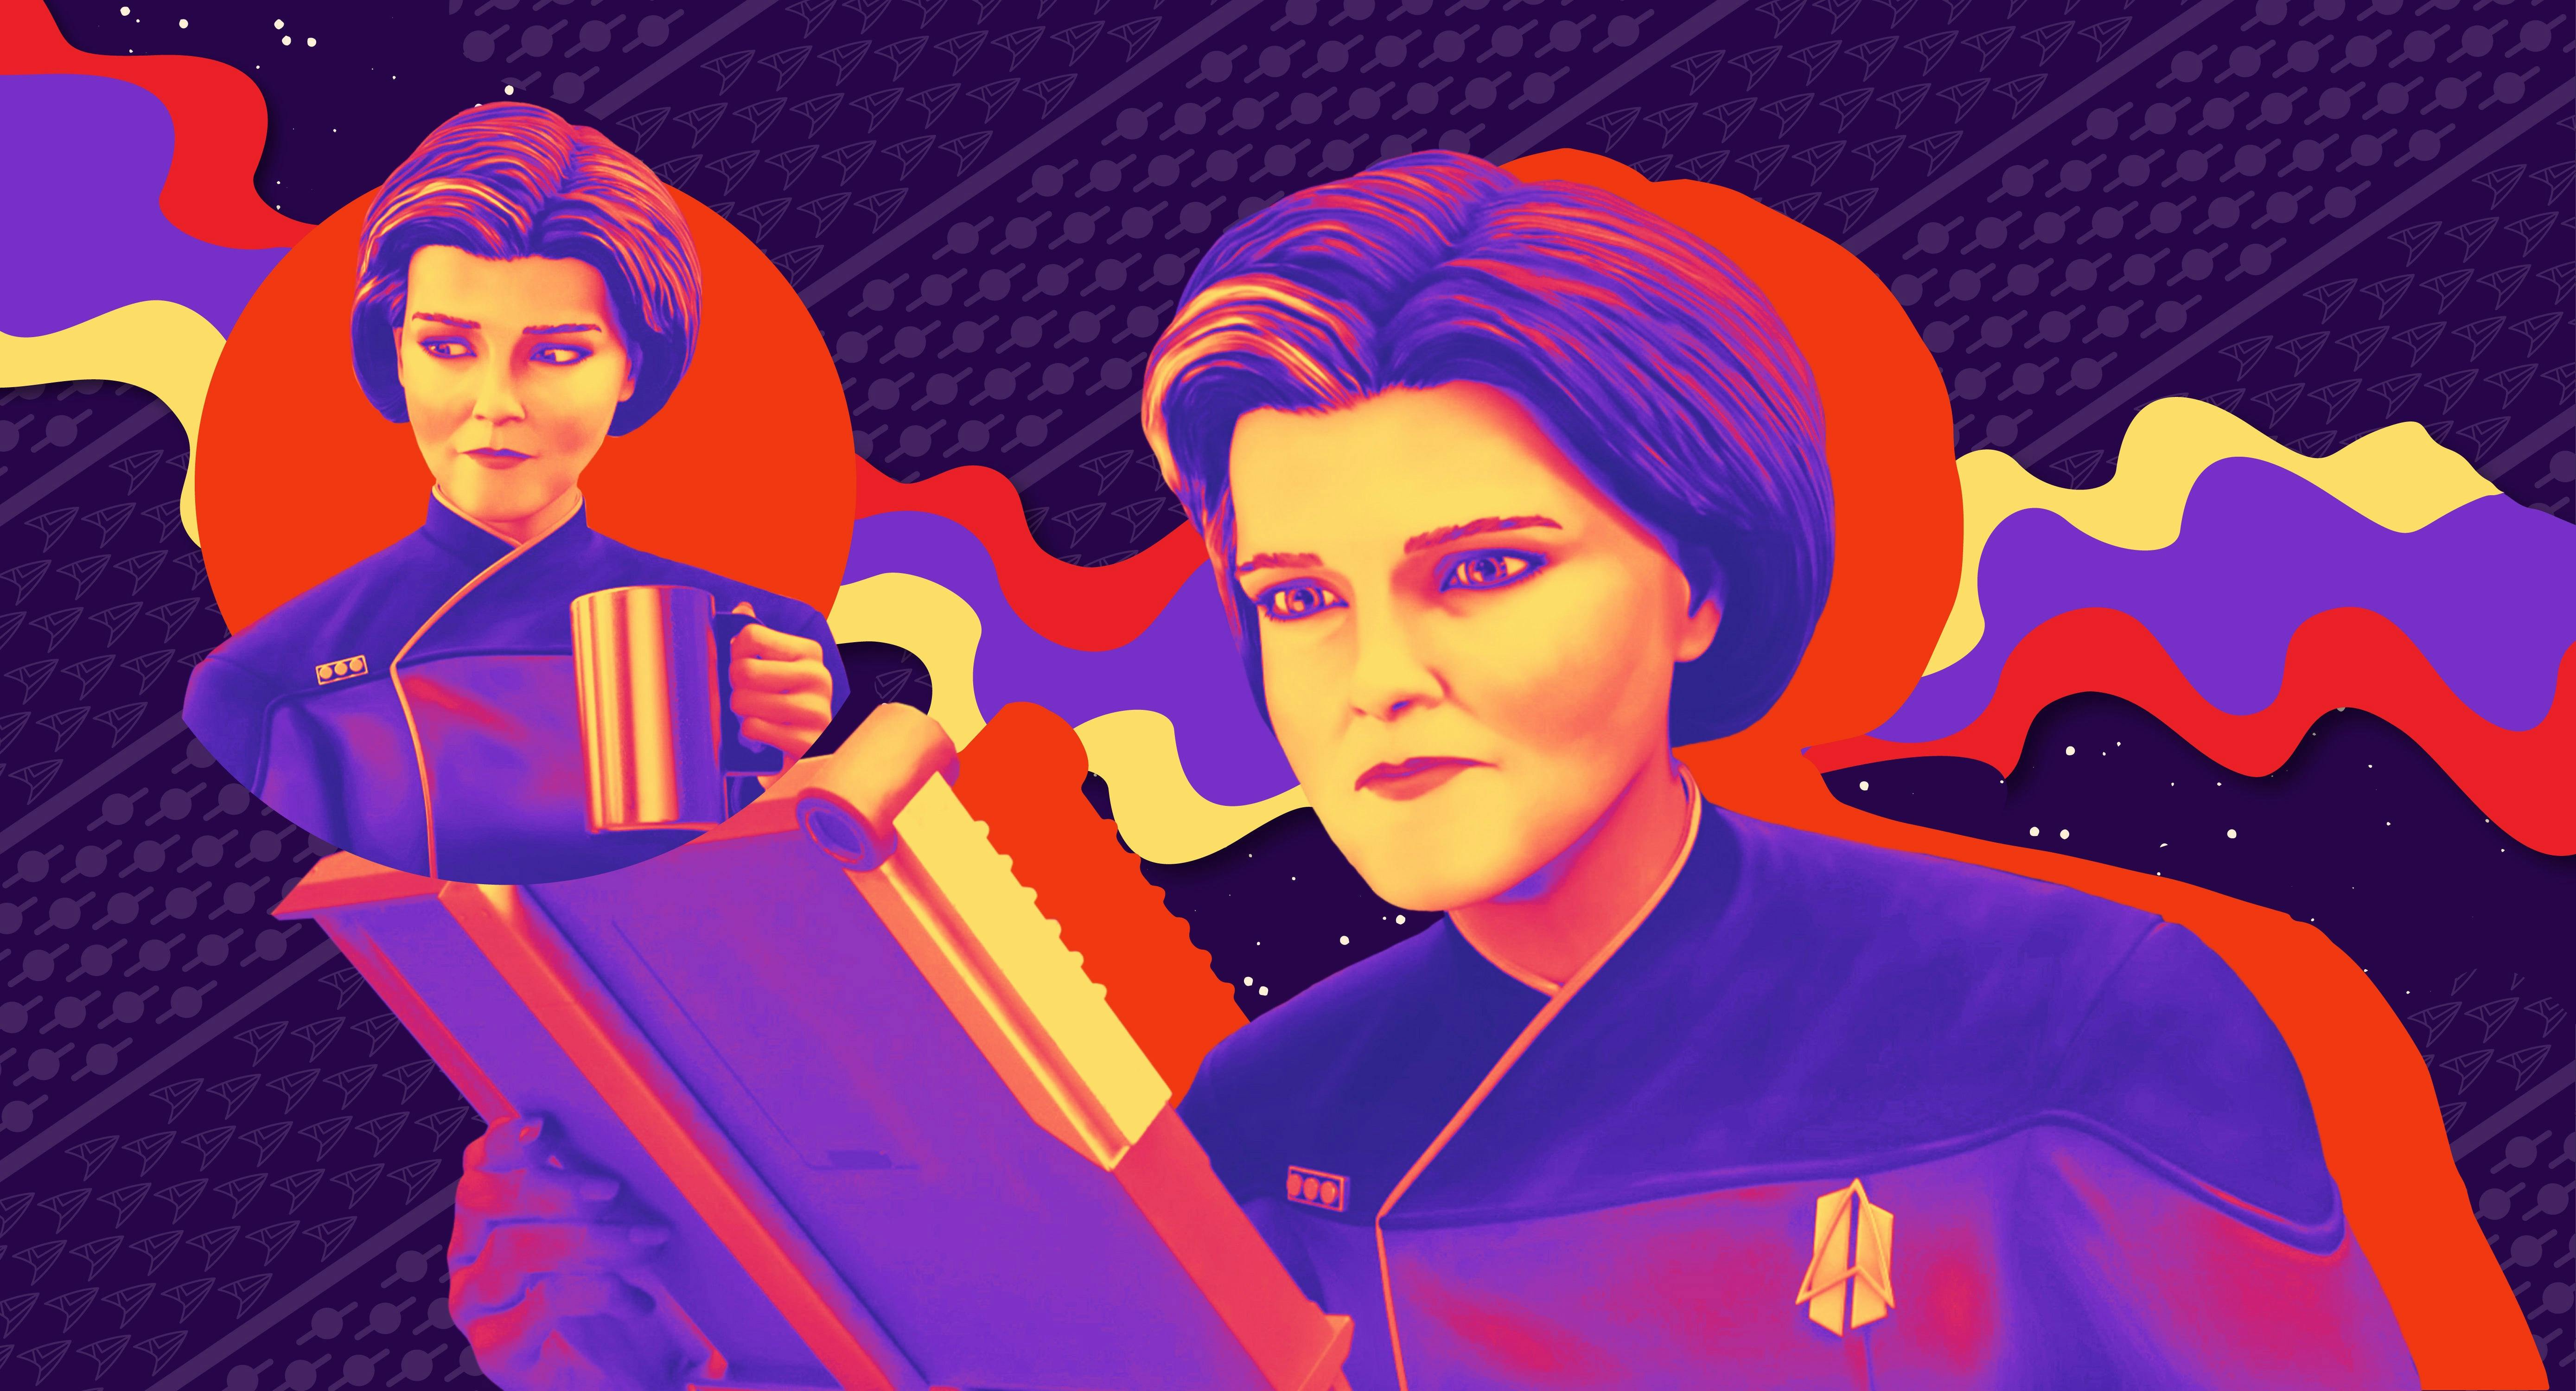 Illustrated banner of Star Trek: Prodigy's Vice Admiral Janeway